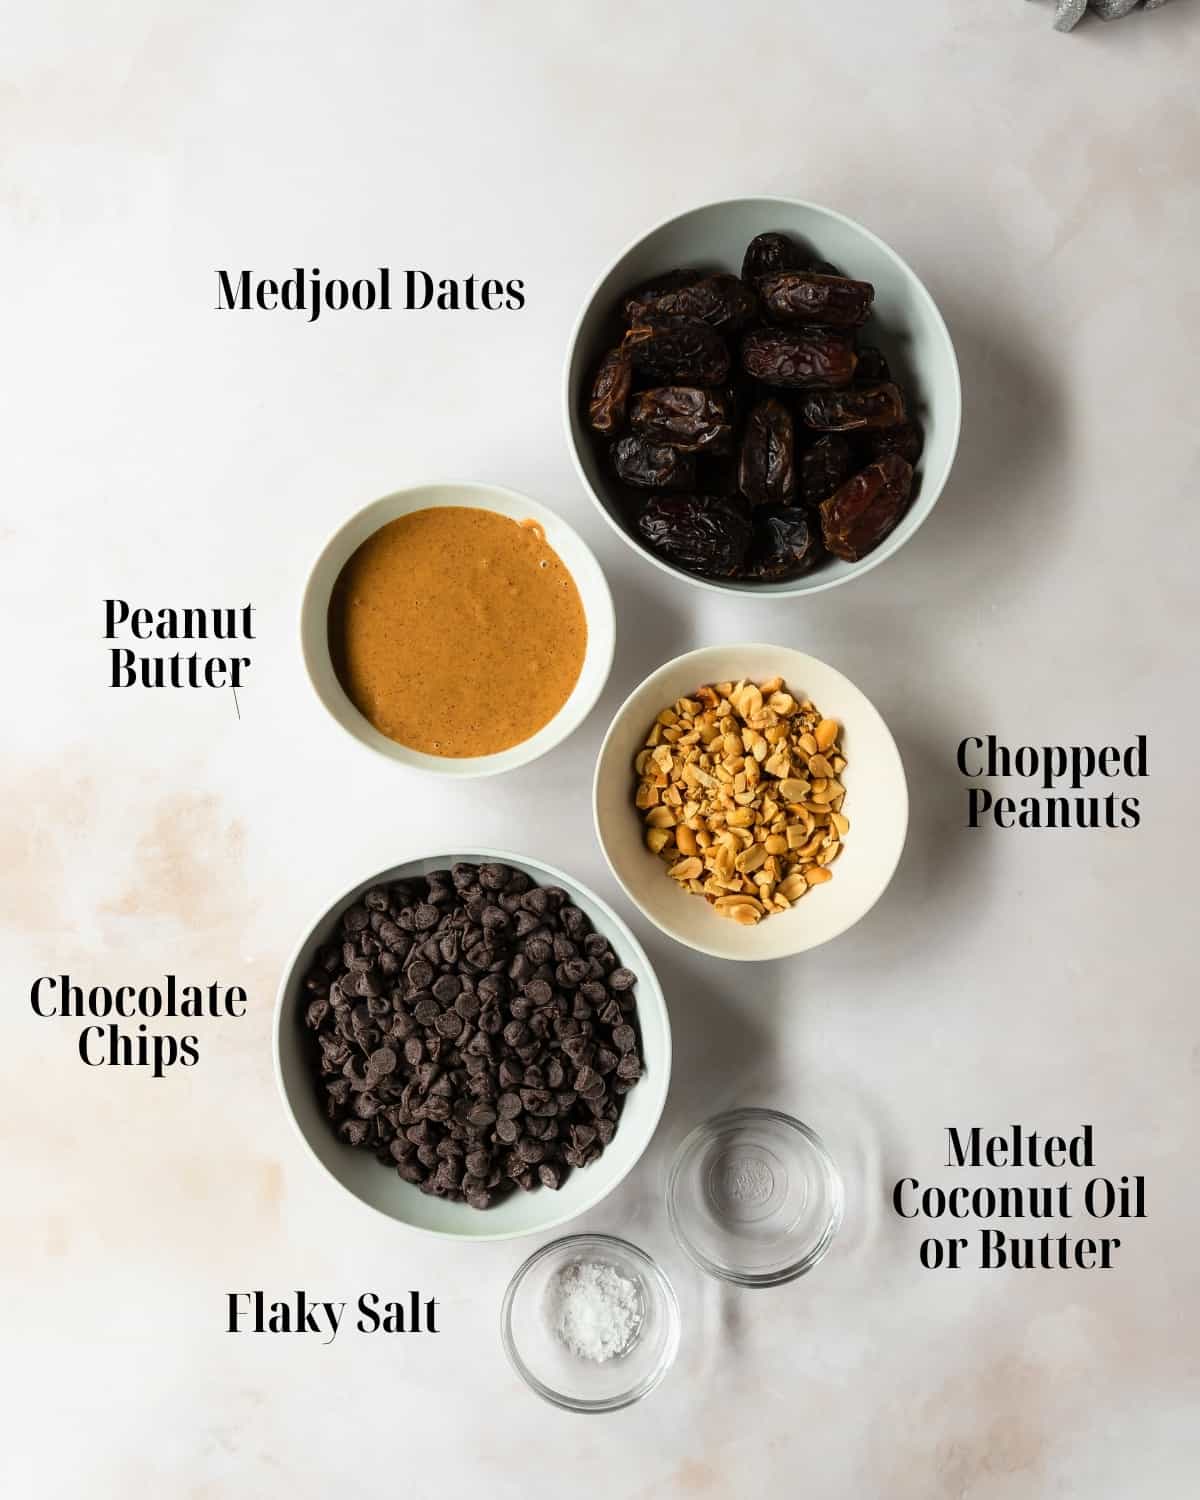 Gather Medjool dates, peanut butter, chopped peanuts, your choice of chocolate chips or chunks, coconut oil (optional) and flaky salt (optional).  